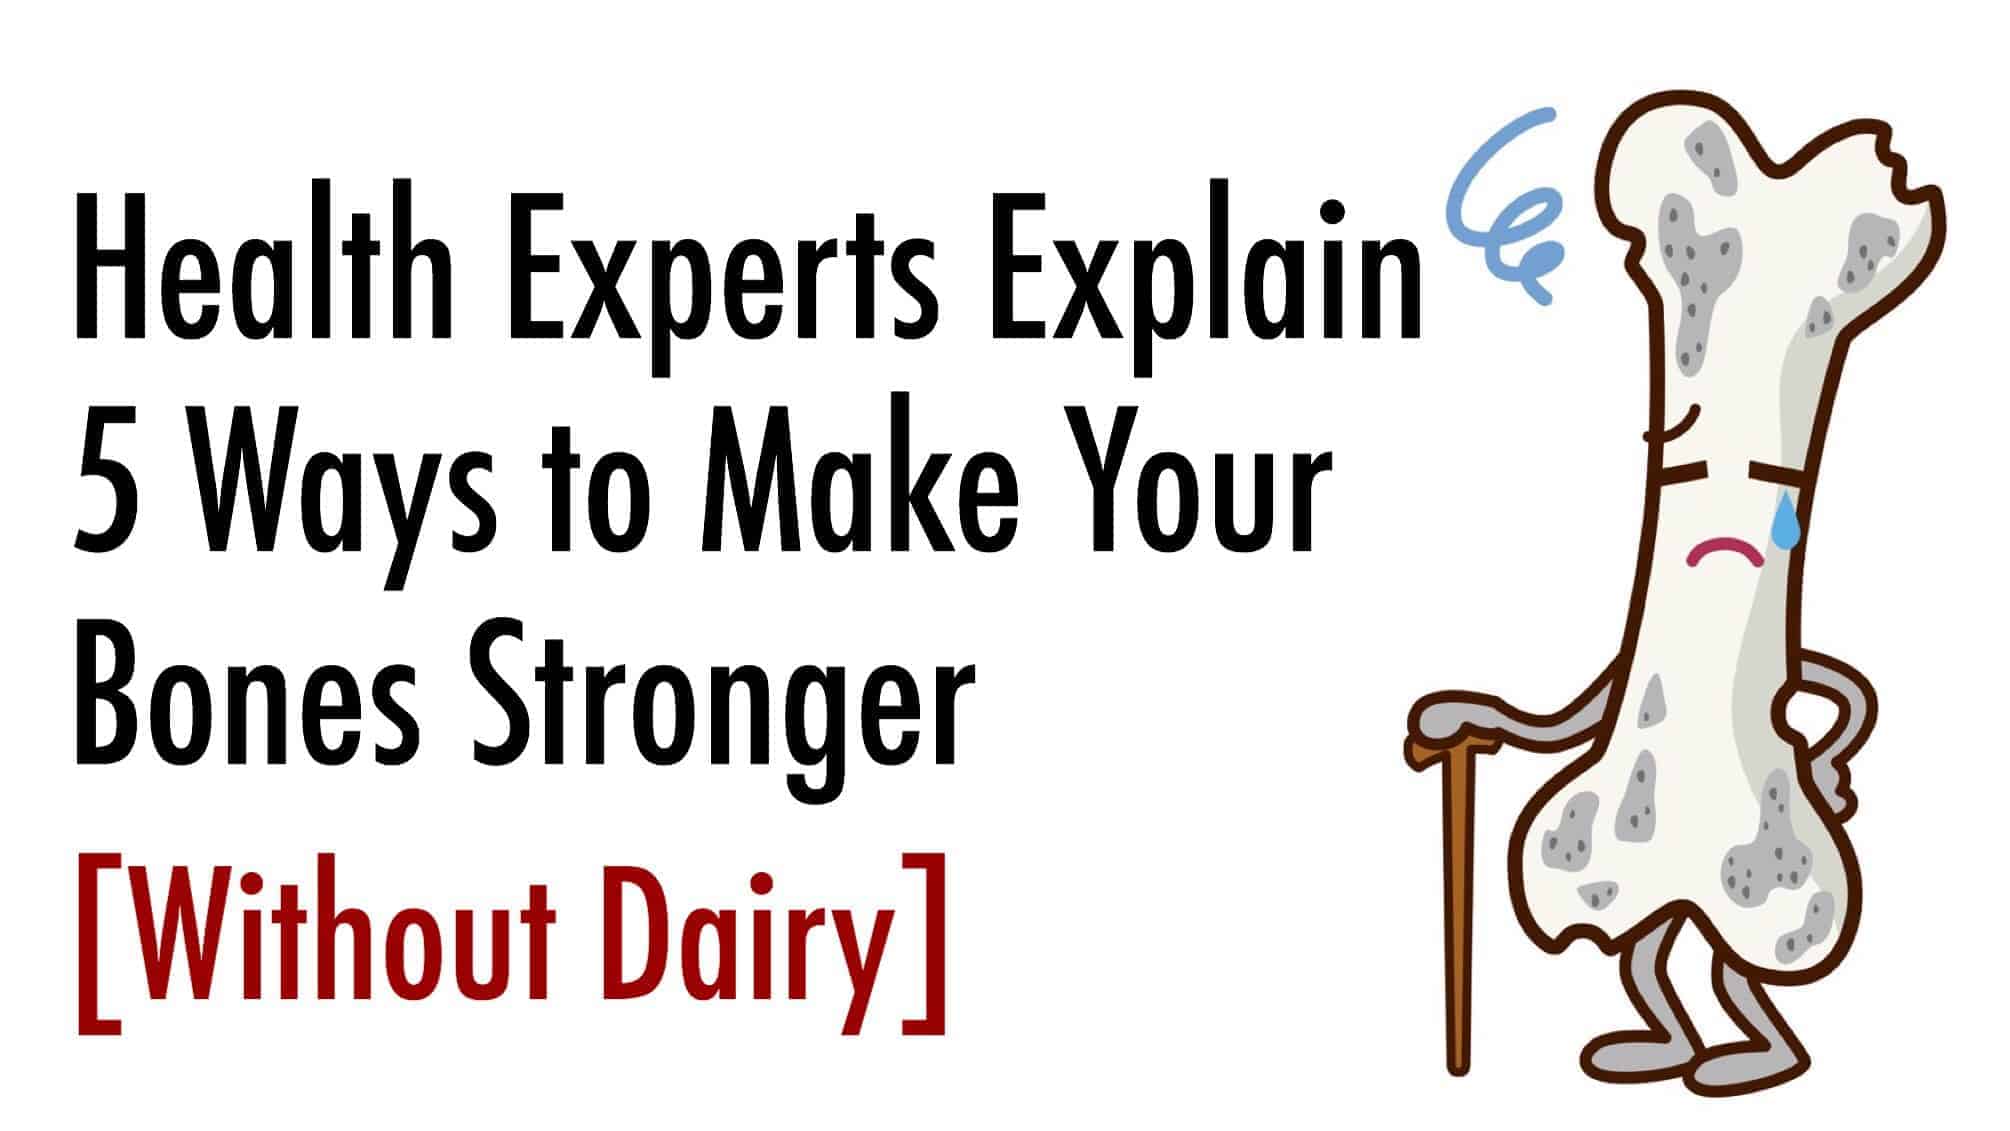 Health Experts Explain 5 Ways to Make Your Bones Stronger (Without Dairy)